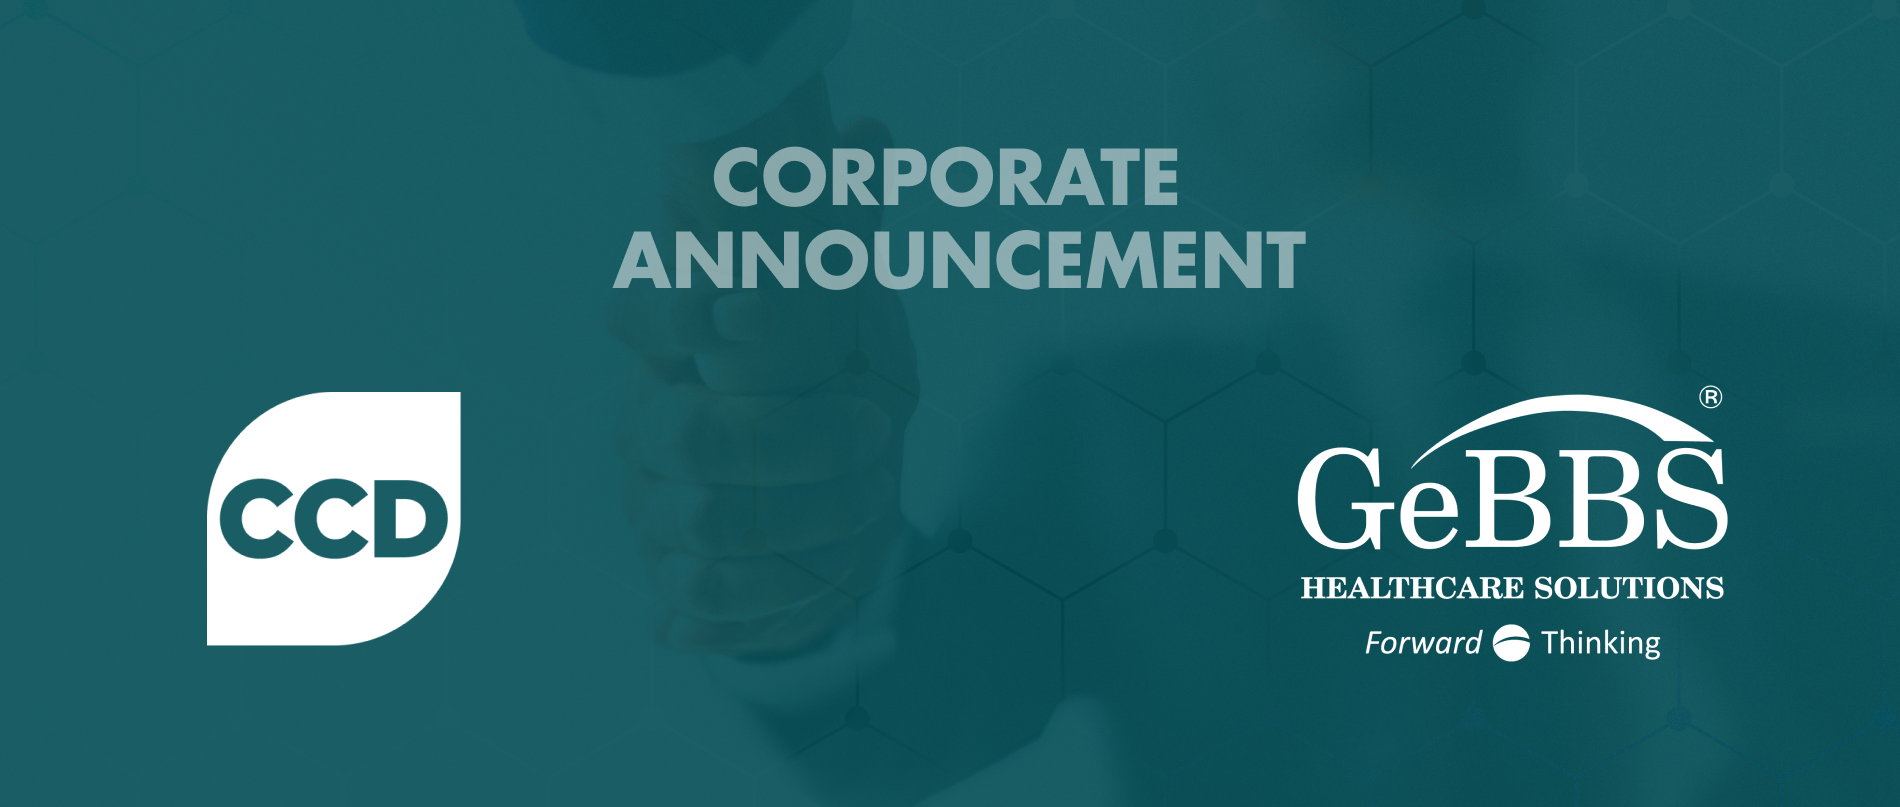 CCD To Join Forces with GeBBS: Creating A Global Healthcare Technology Alliance